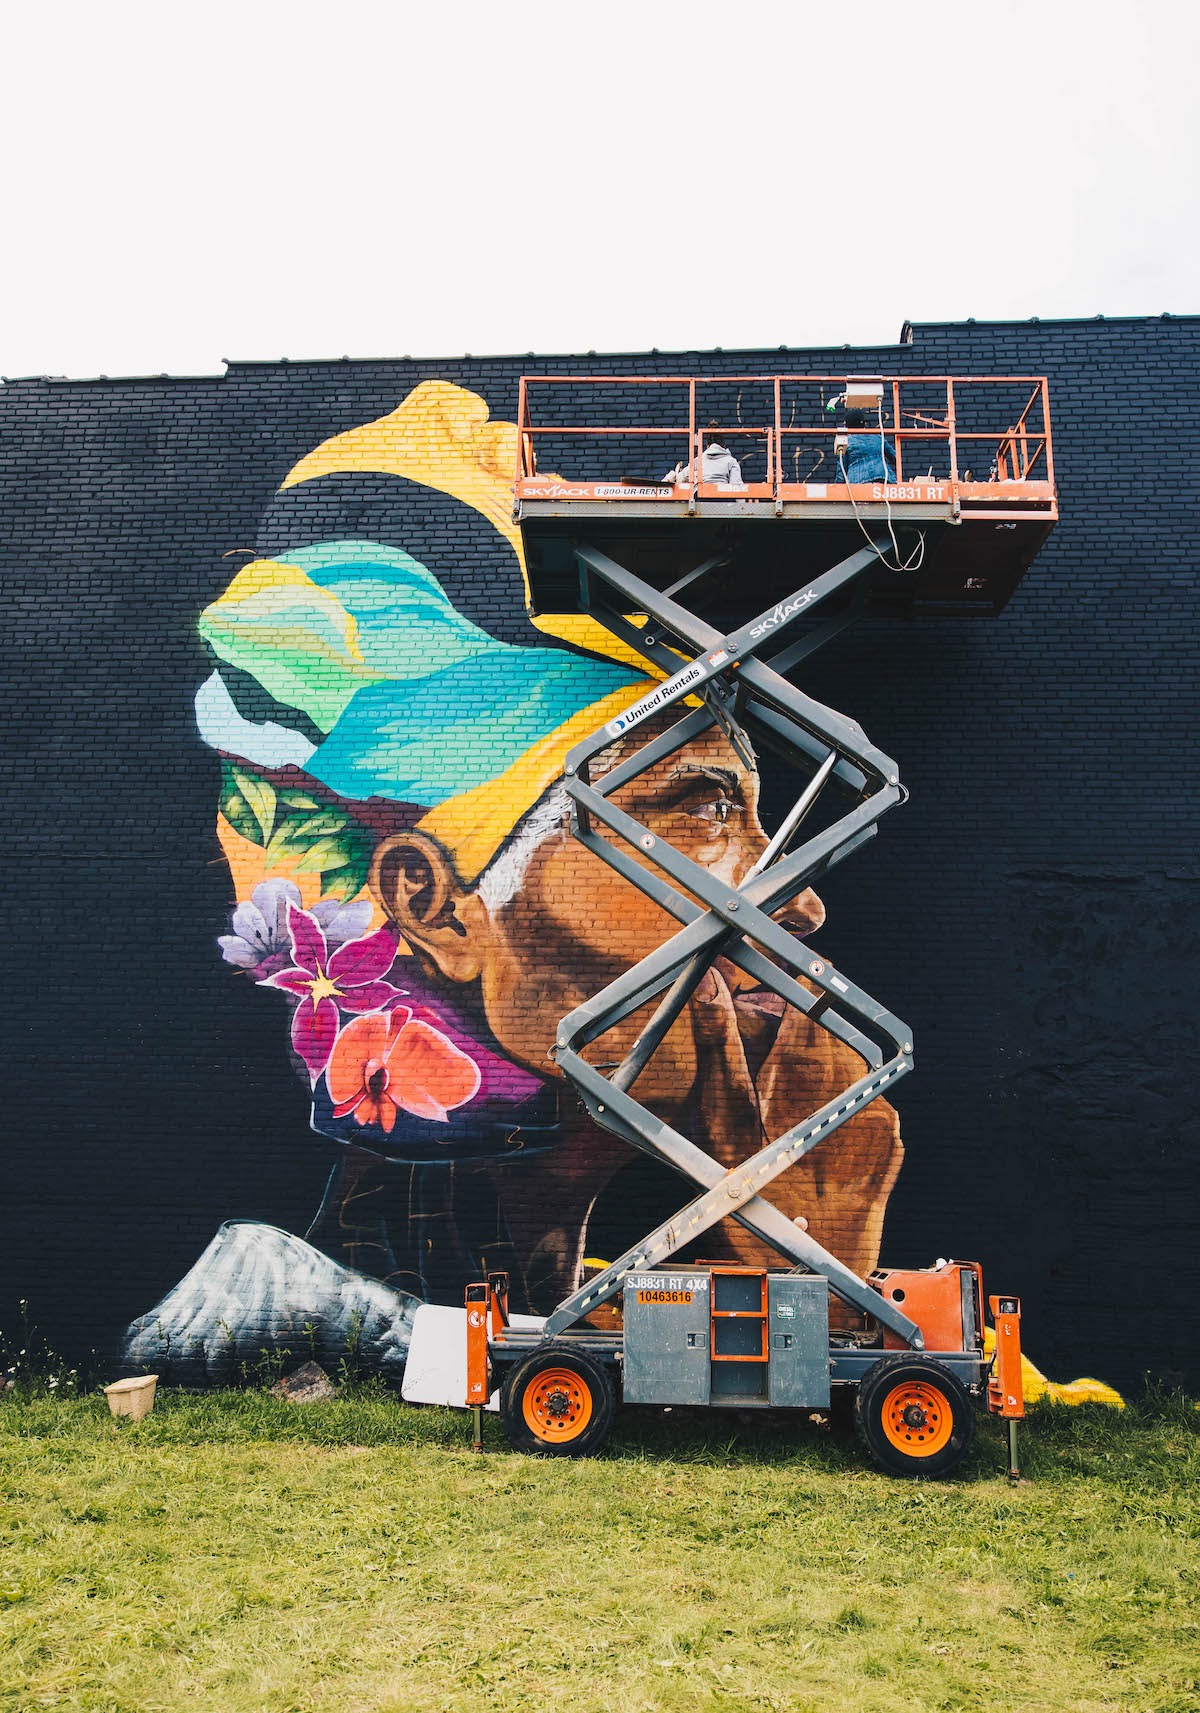 BLKOUT Walls Mural Festival in the City of Detroit